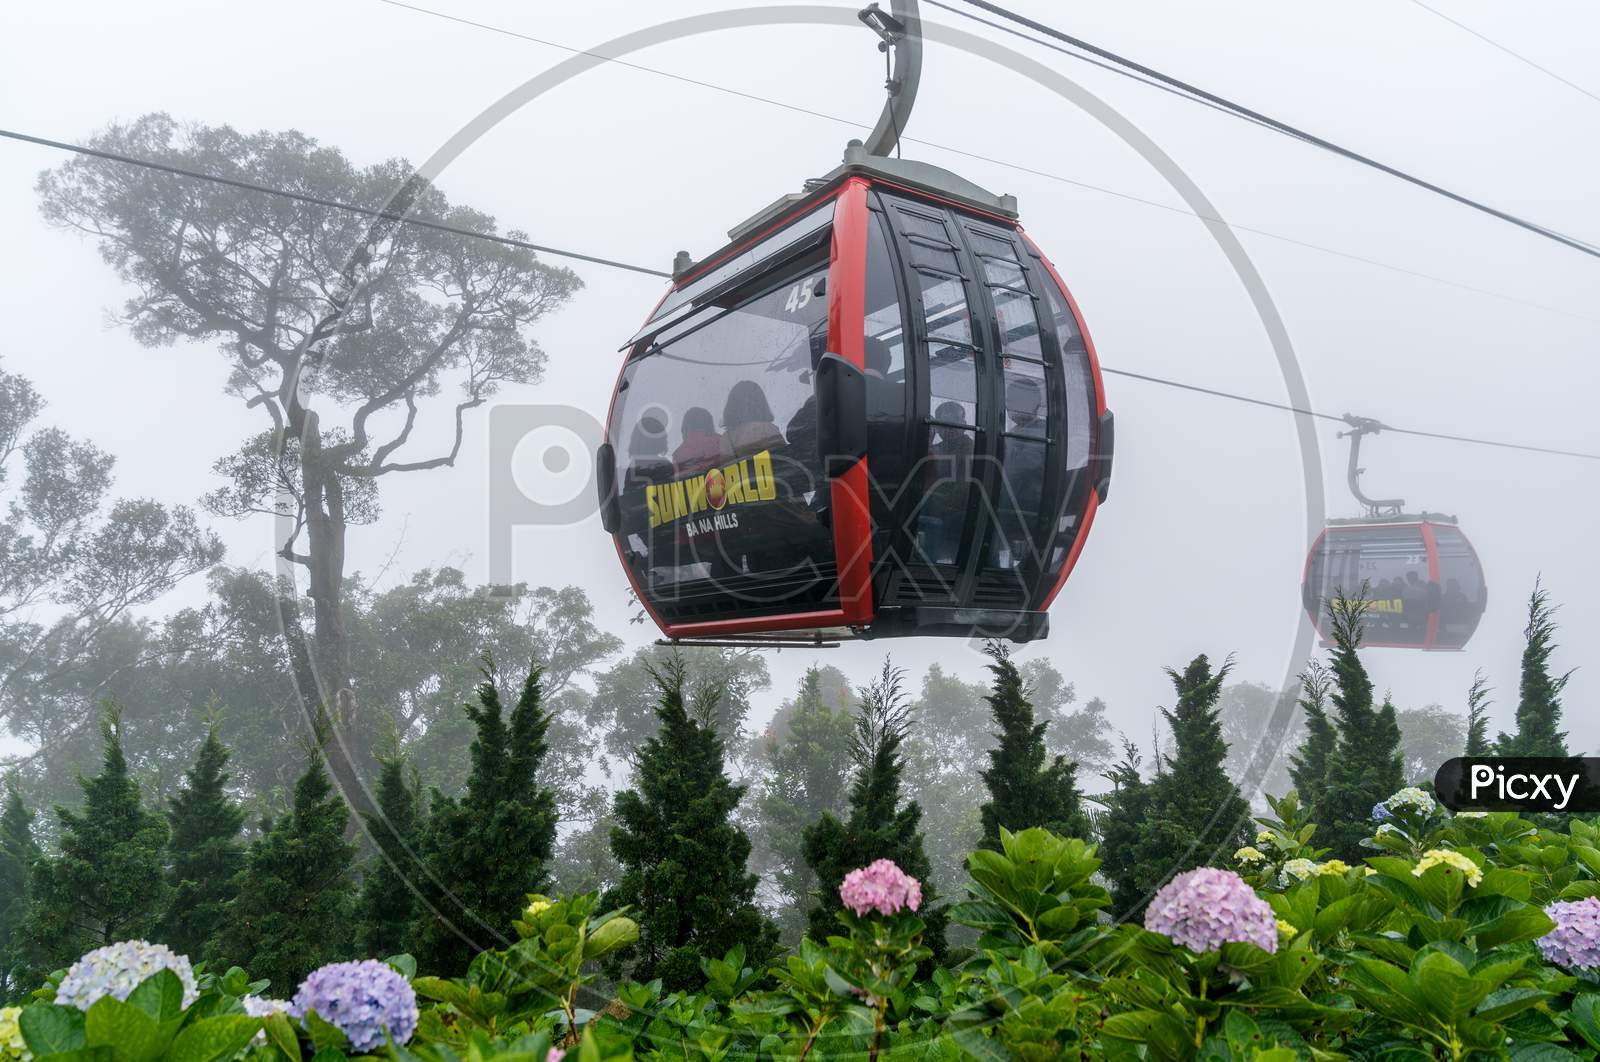 Cable Car At The Ba Na Hills Resort In Vietnam